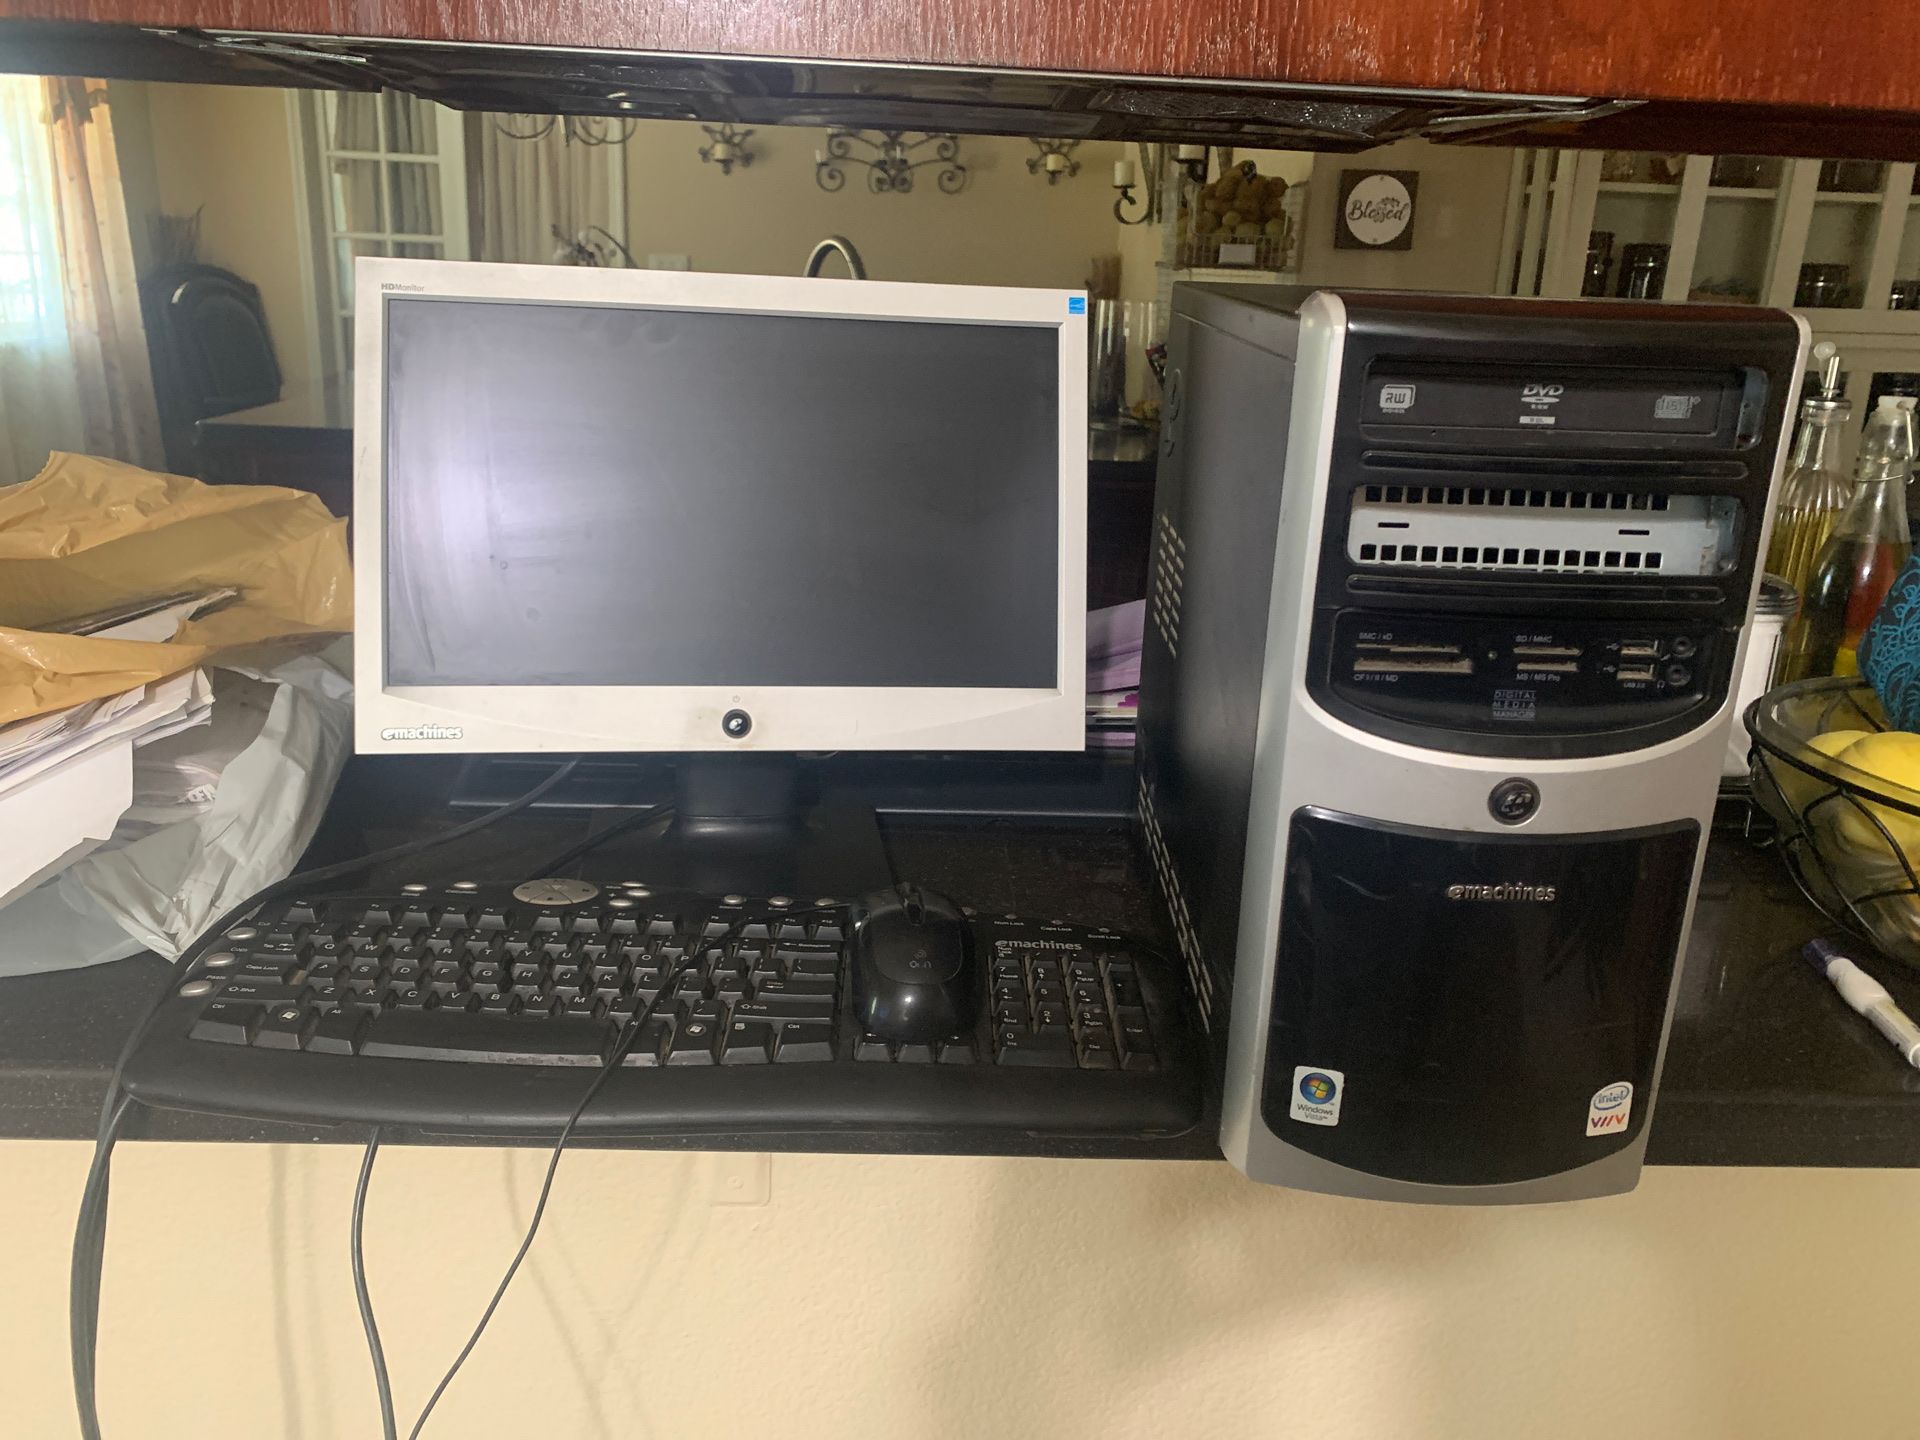 Desktop computer emachines keyboard mouse camera monitor and software